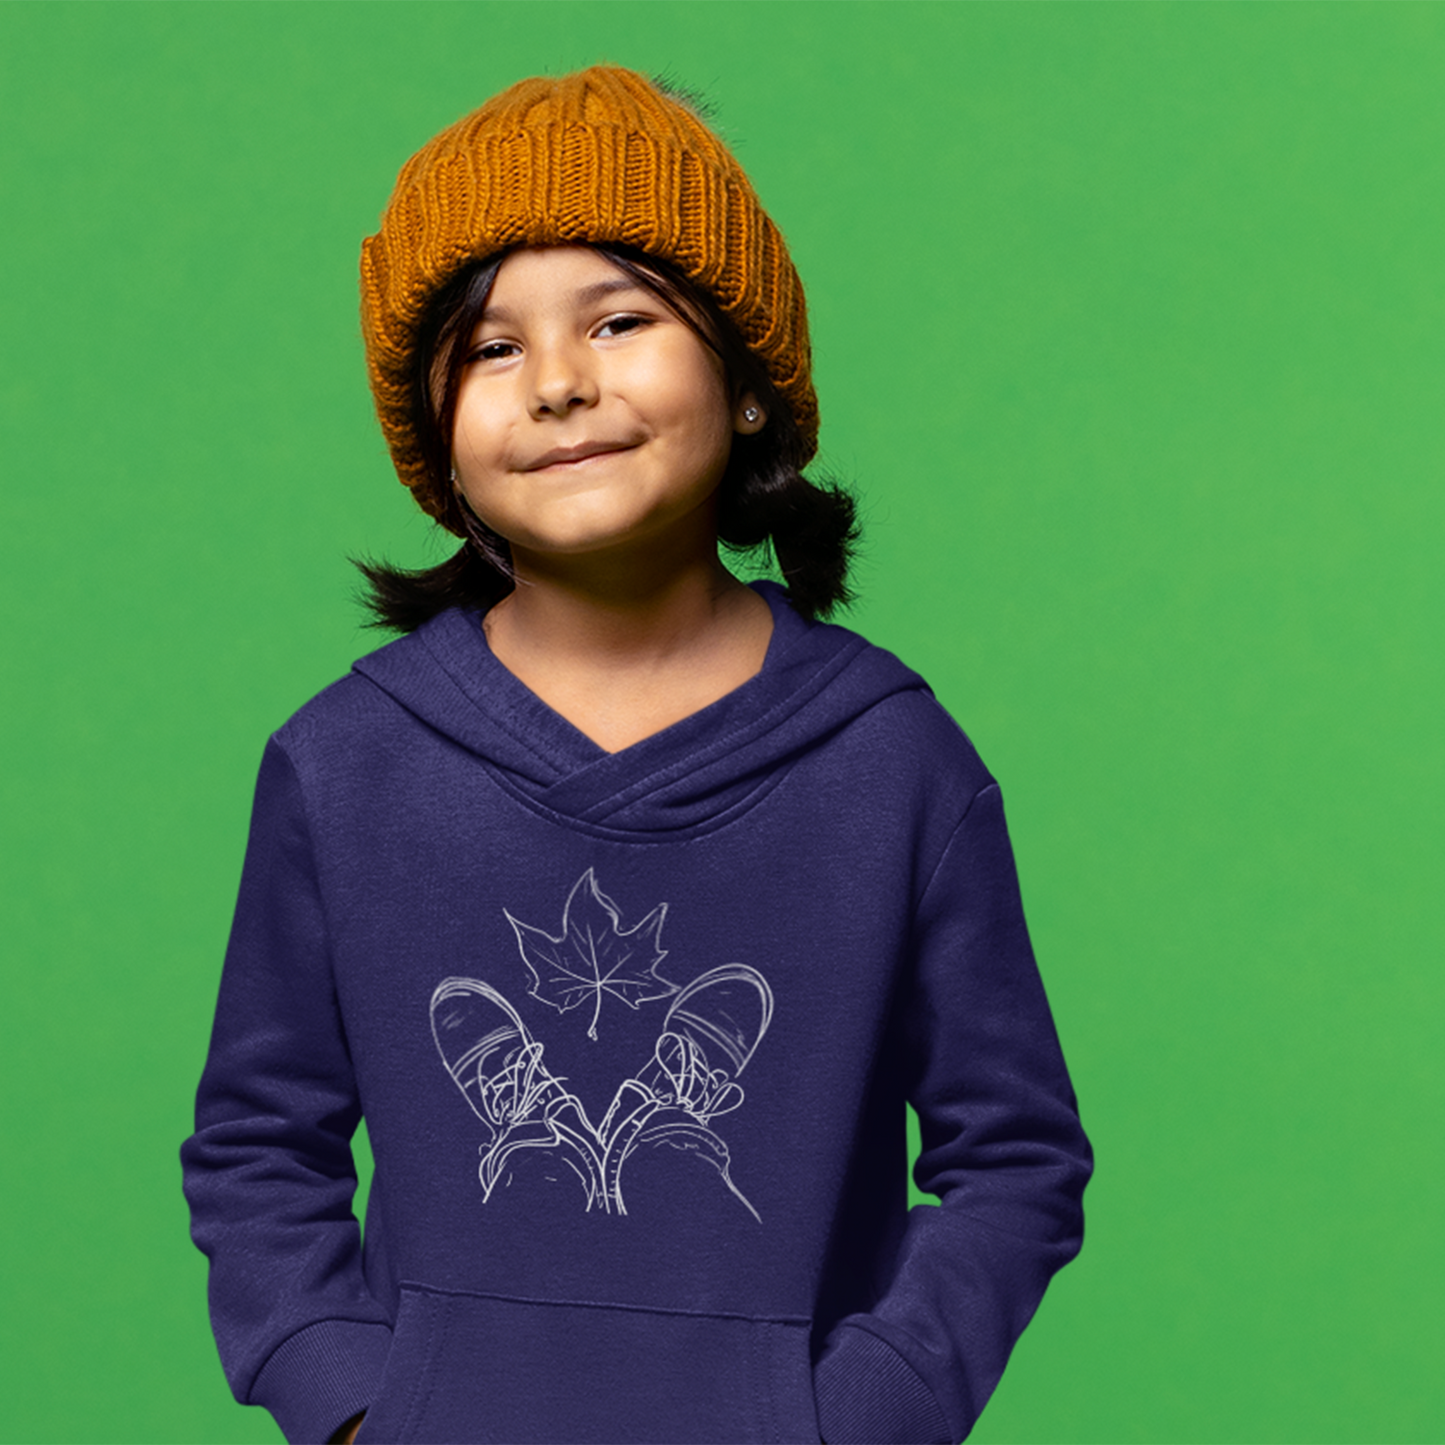 Fall Leaf and Boots Sketch - Kids Unisex Hoodie